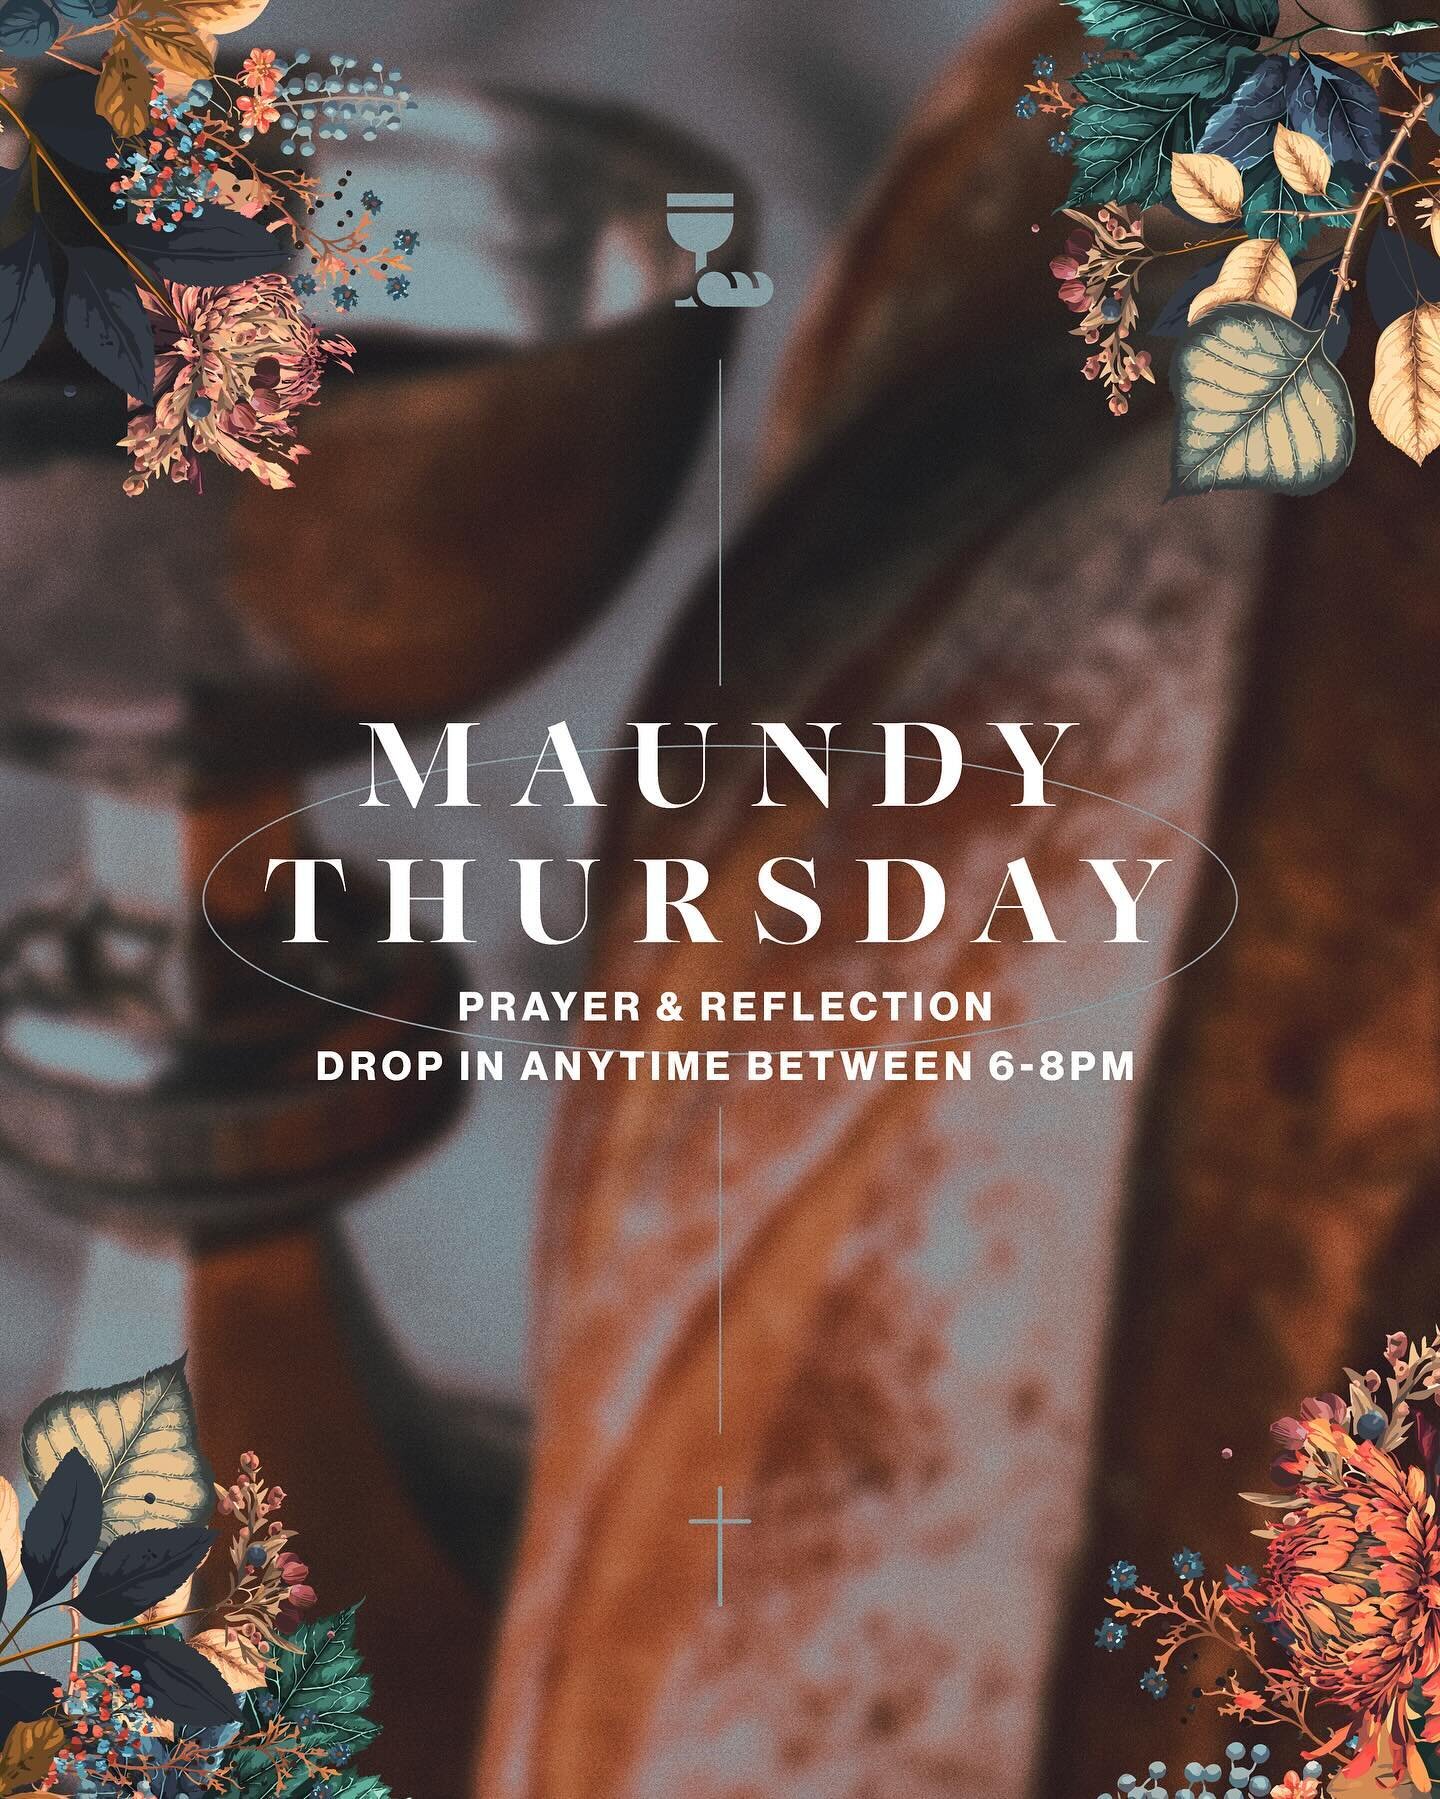 Maundy Thursday commemorates the evening of the last supper, the night before Jesus would be crucified. Join us on March 28th anytime between 6pm and 8pm for a time of reflection at our prayer stations, Scripture readings, and self-guided communion.